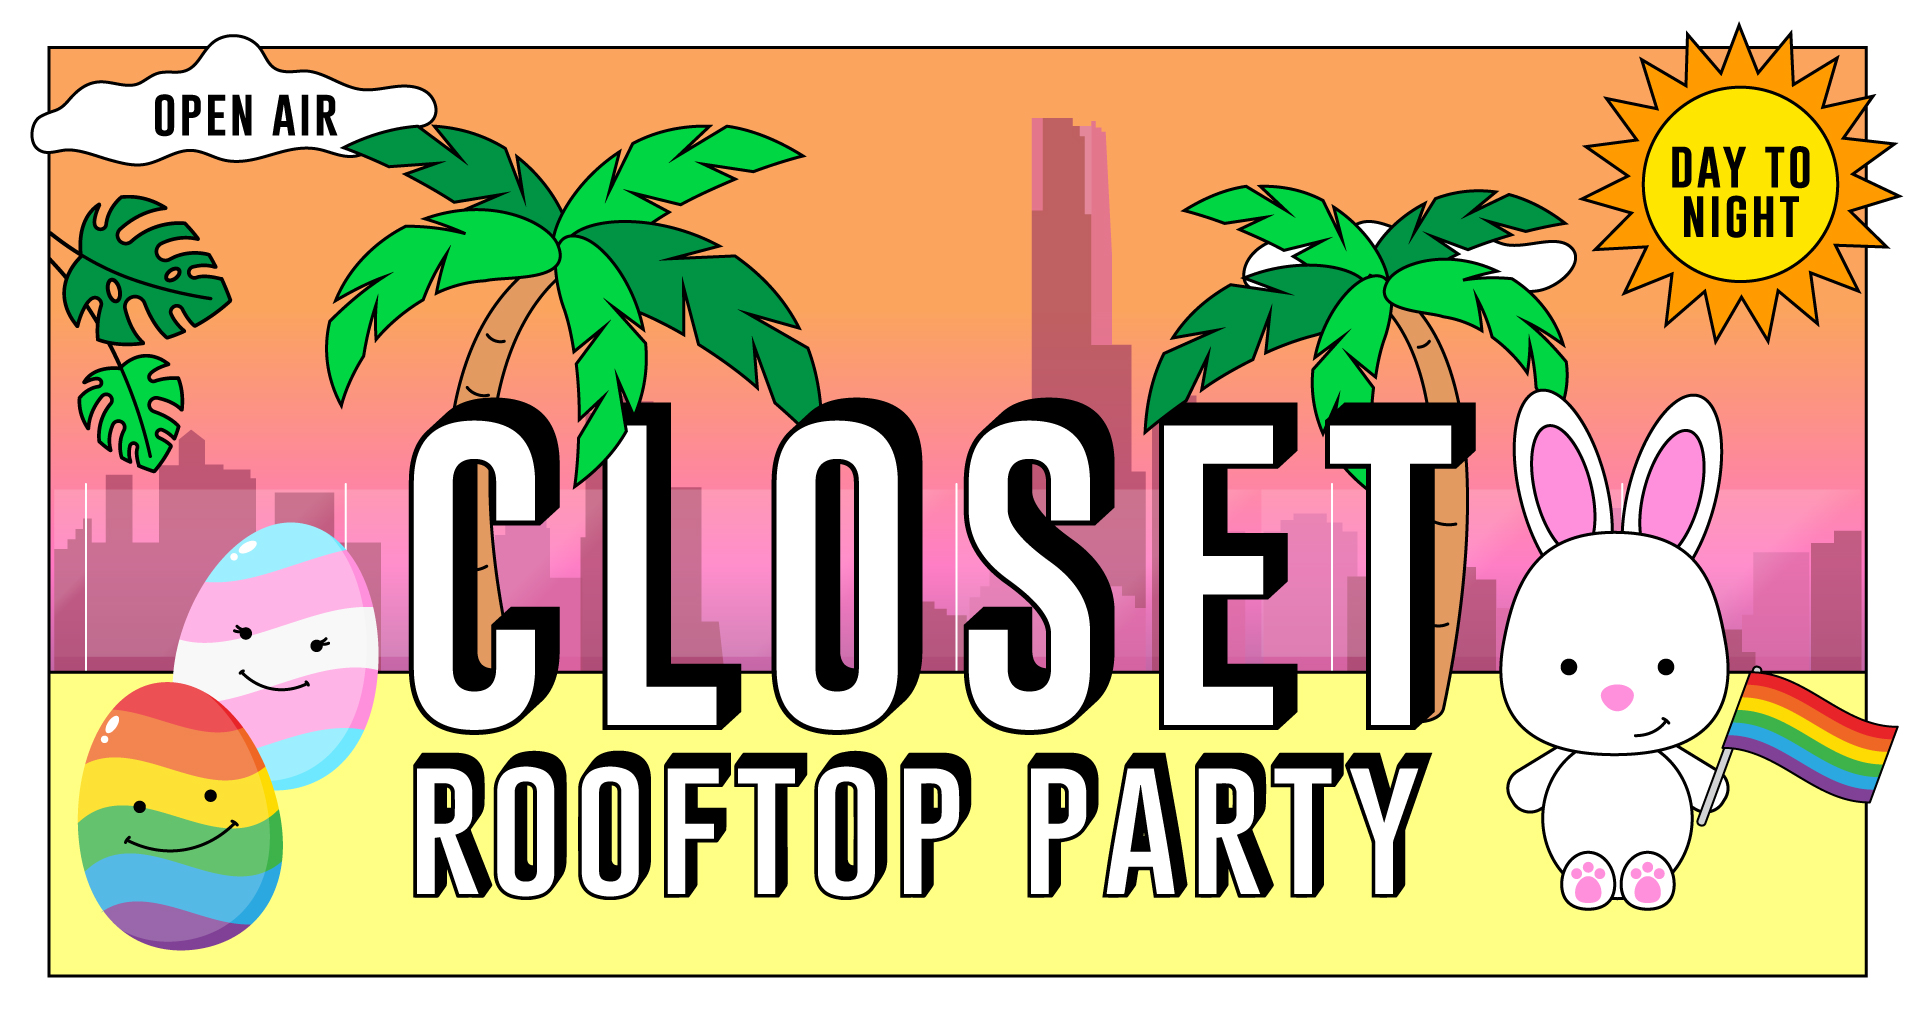 CLOSET - Rooftop Party - Good Friday